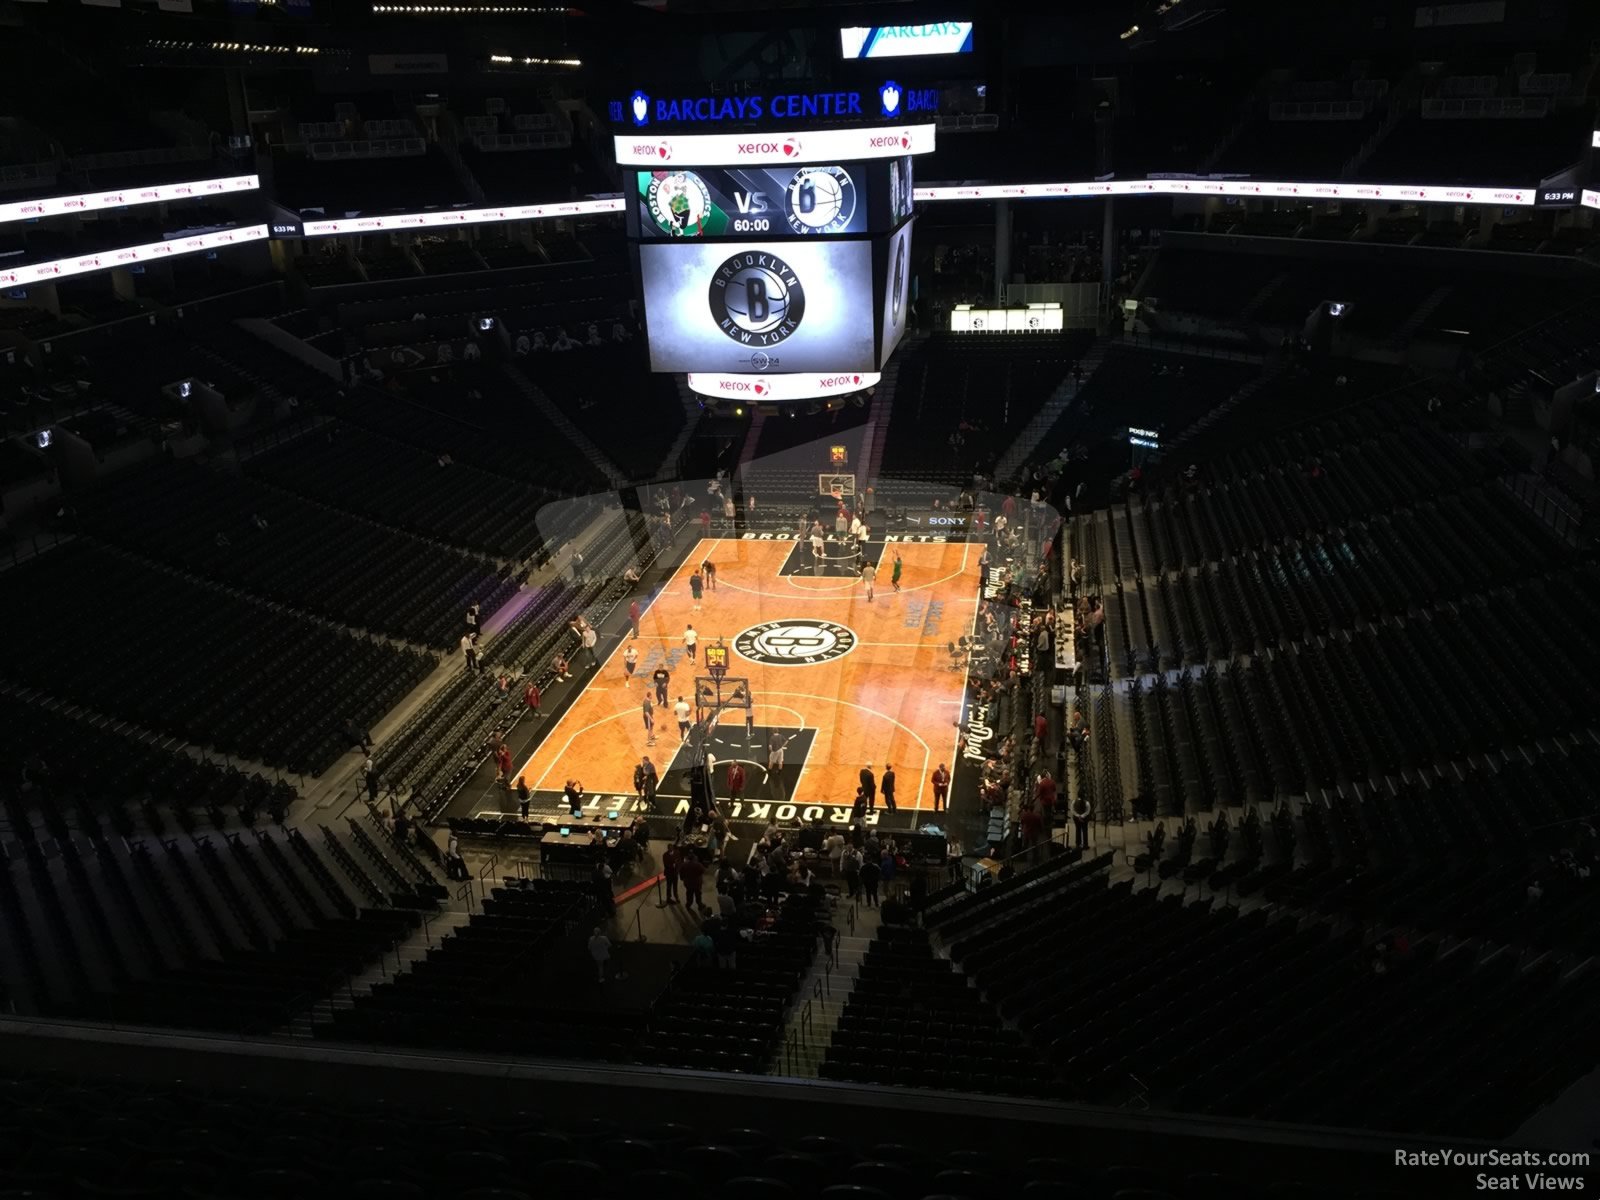 section 215, row 10 seat view  for basketball - barclays center